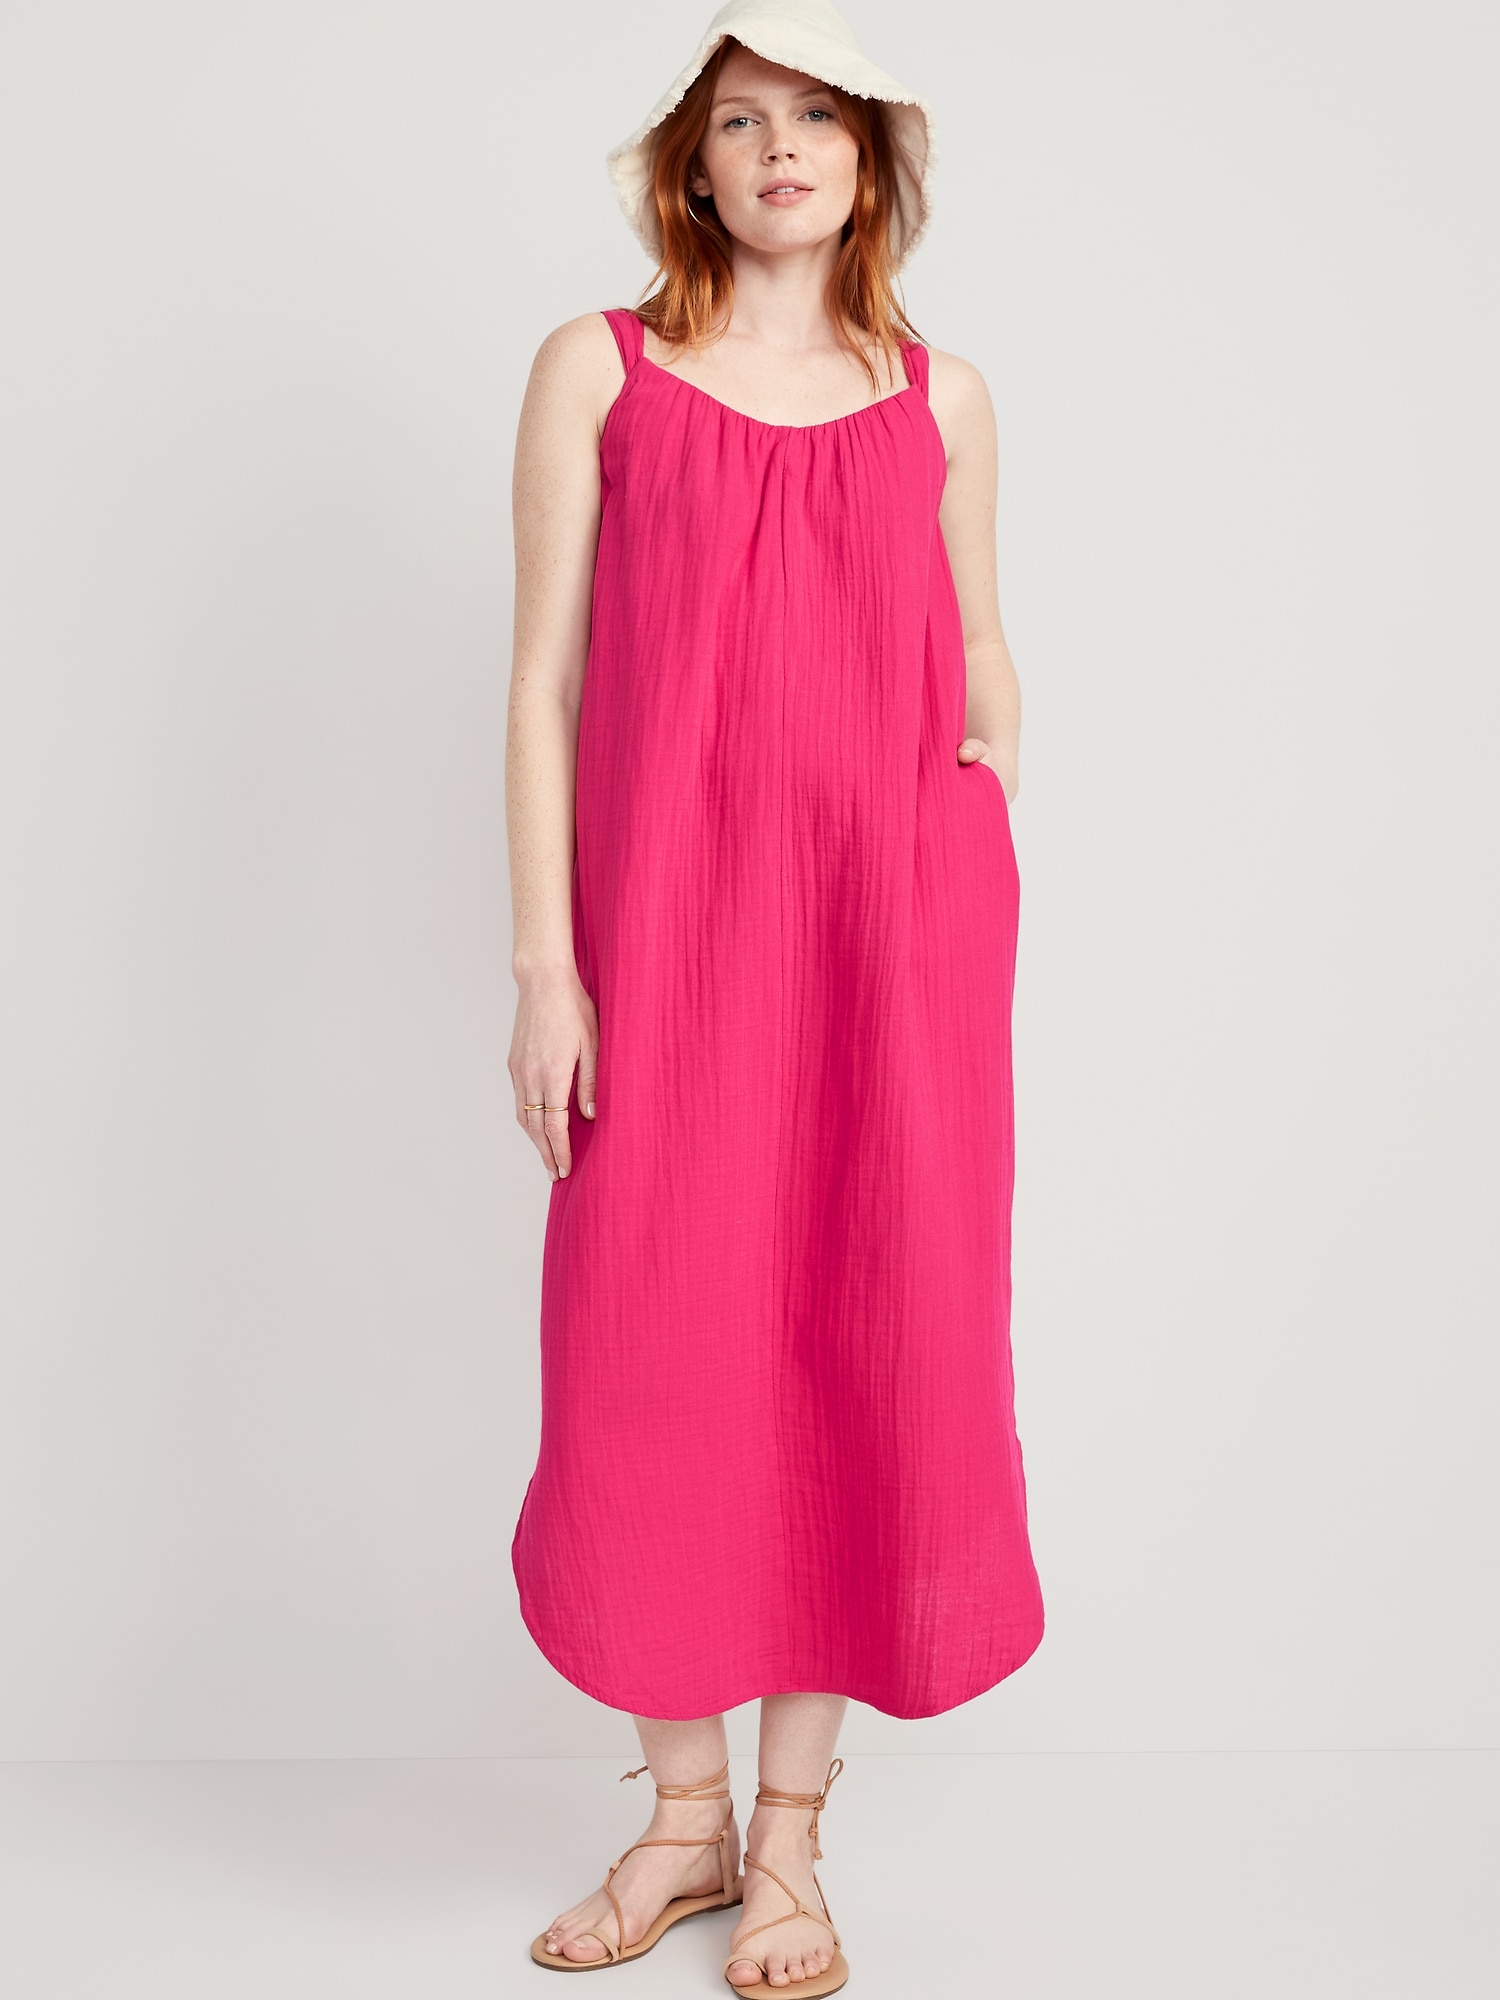 Old Navy Sleeveless Shirred Maxi Dress for Women pink. 1